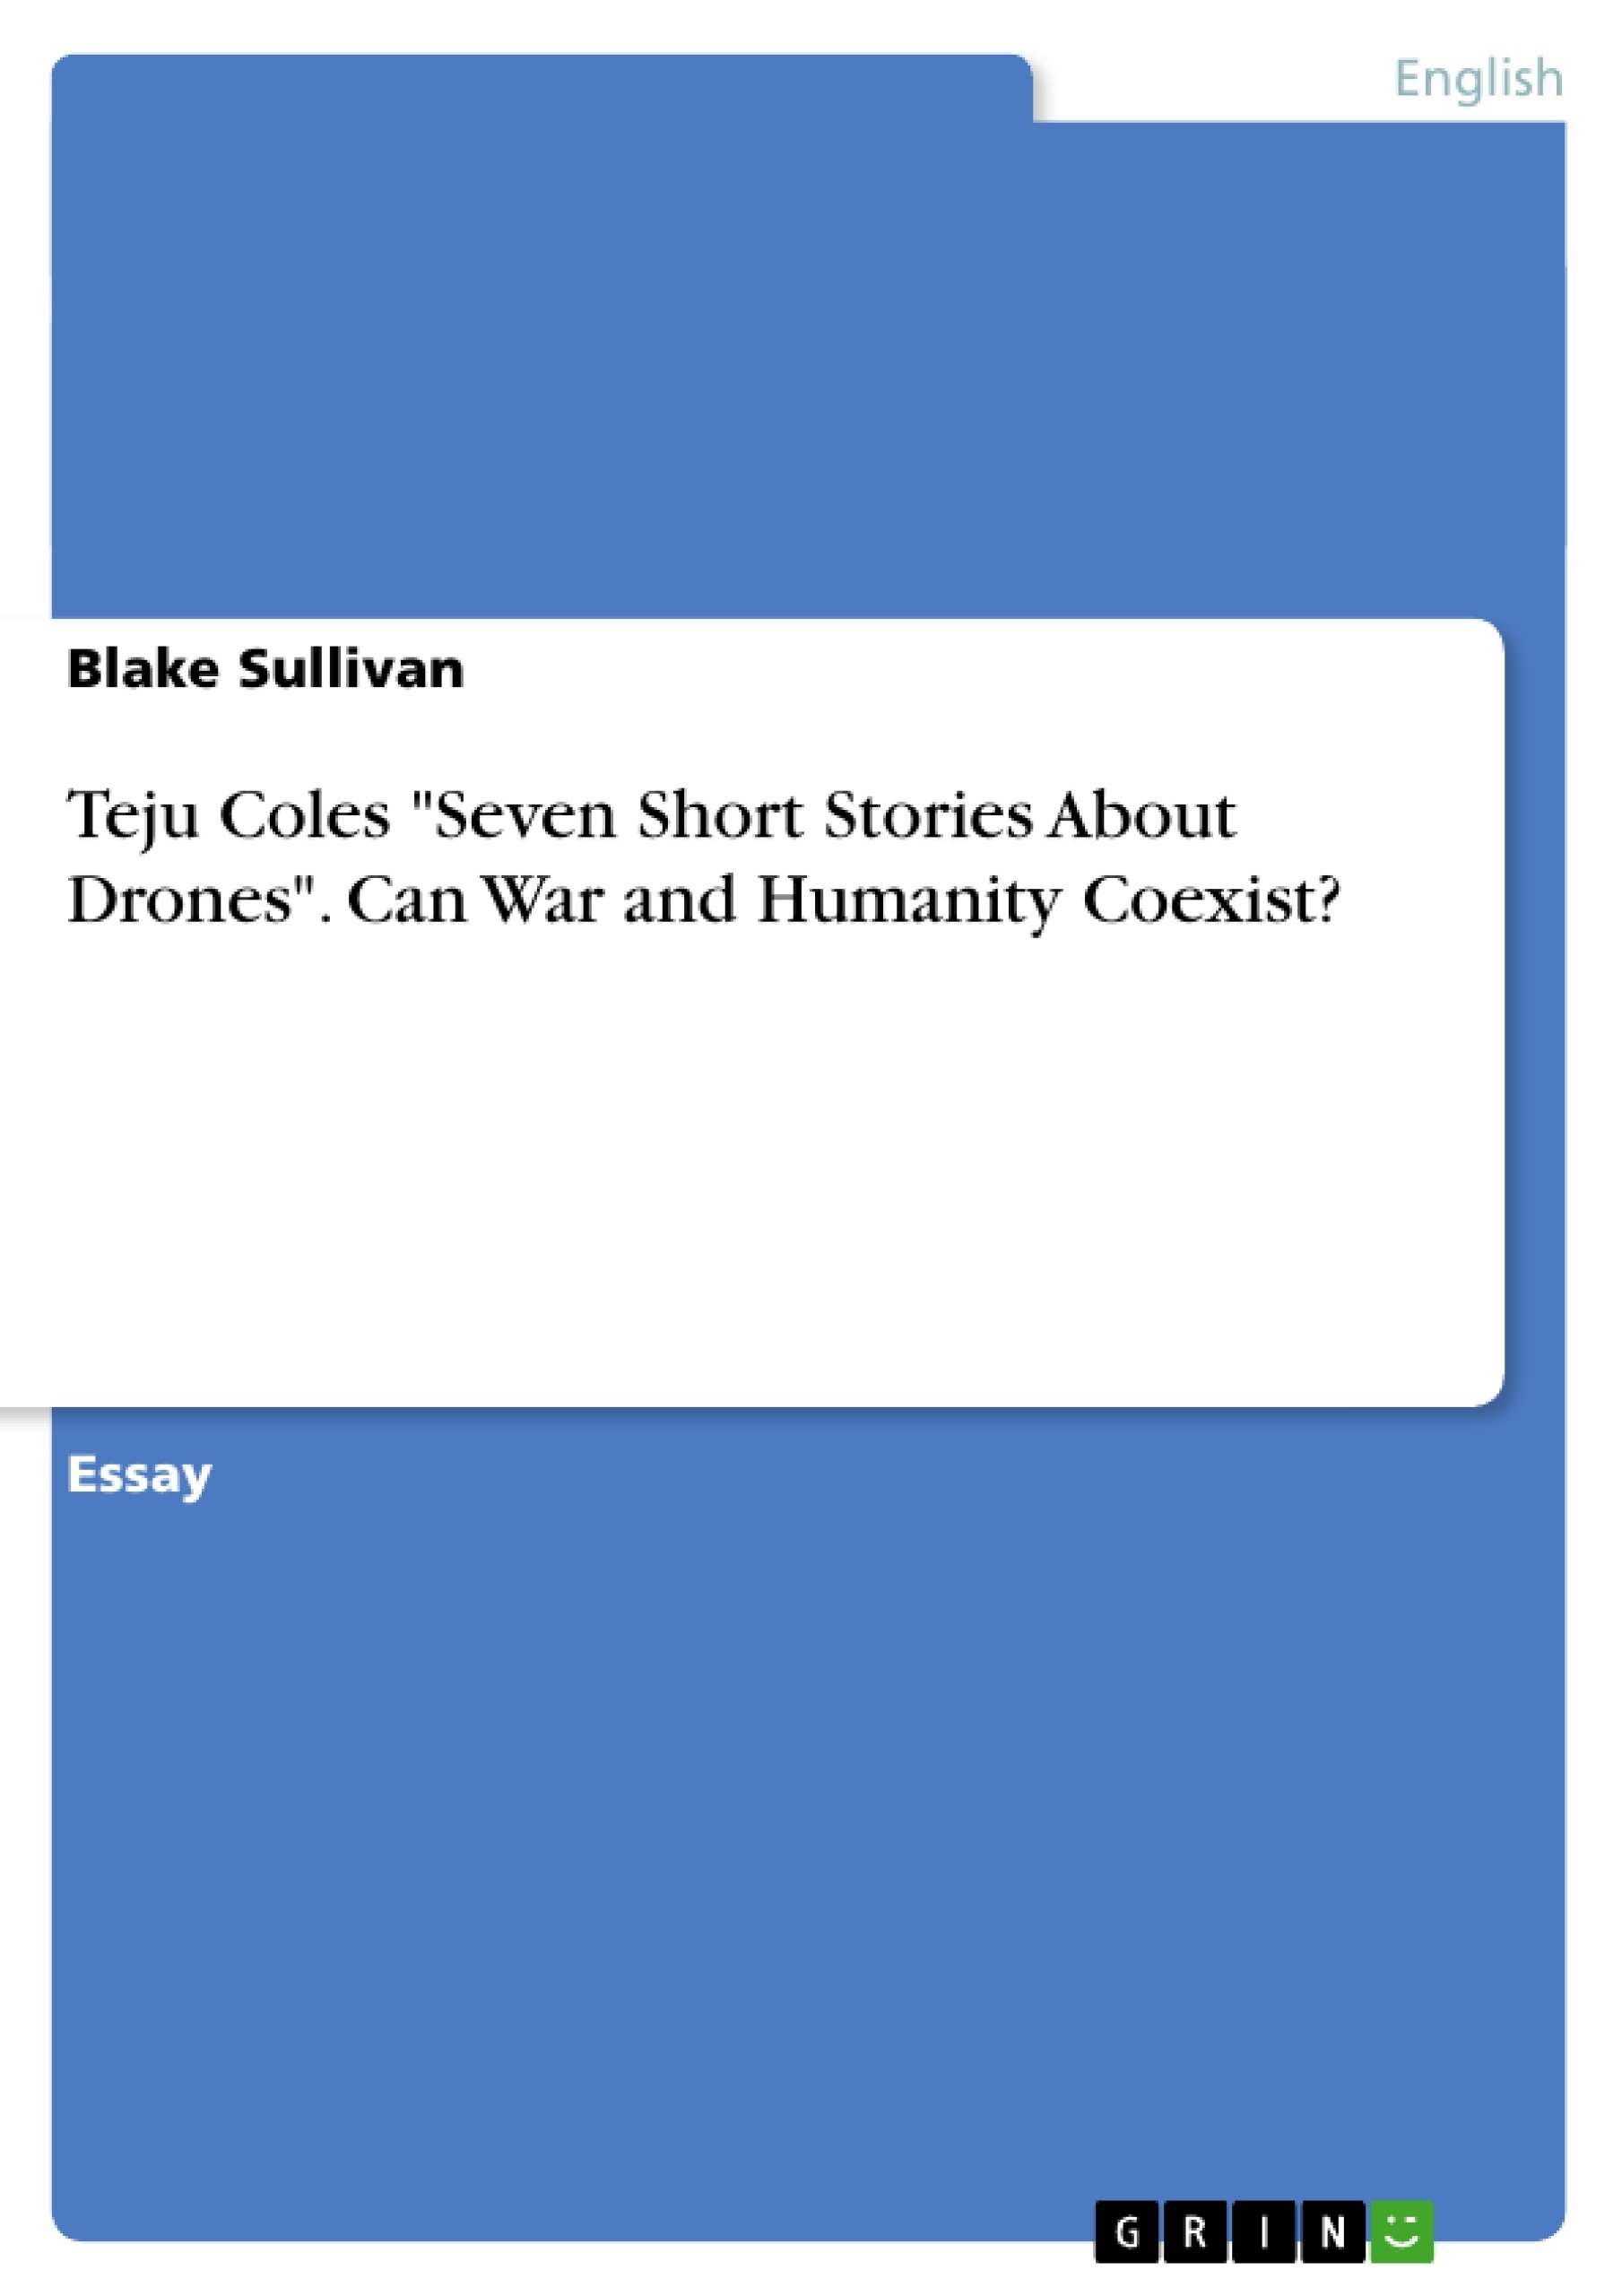 Título: Teju Coles "Seven Short Stories About Drones". Can War and Humanity Coexist?